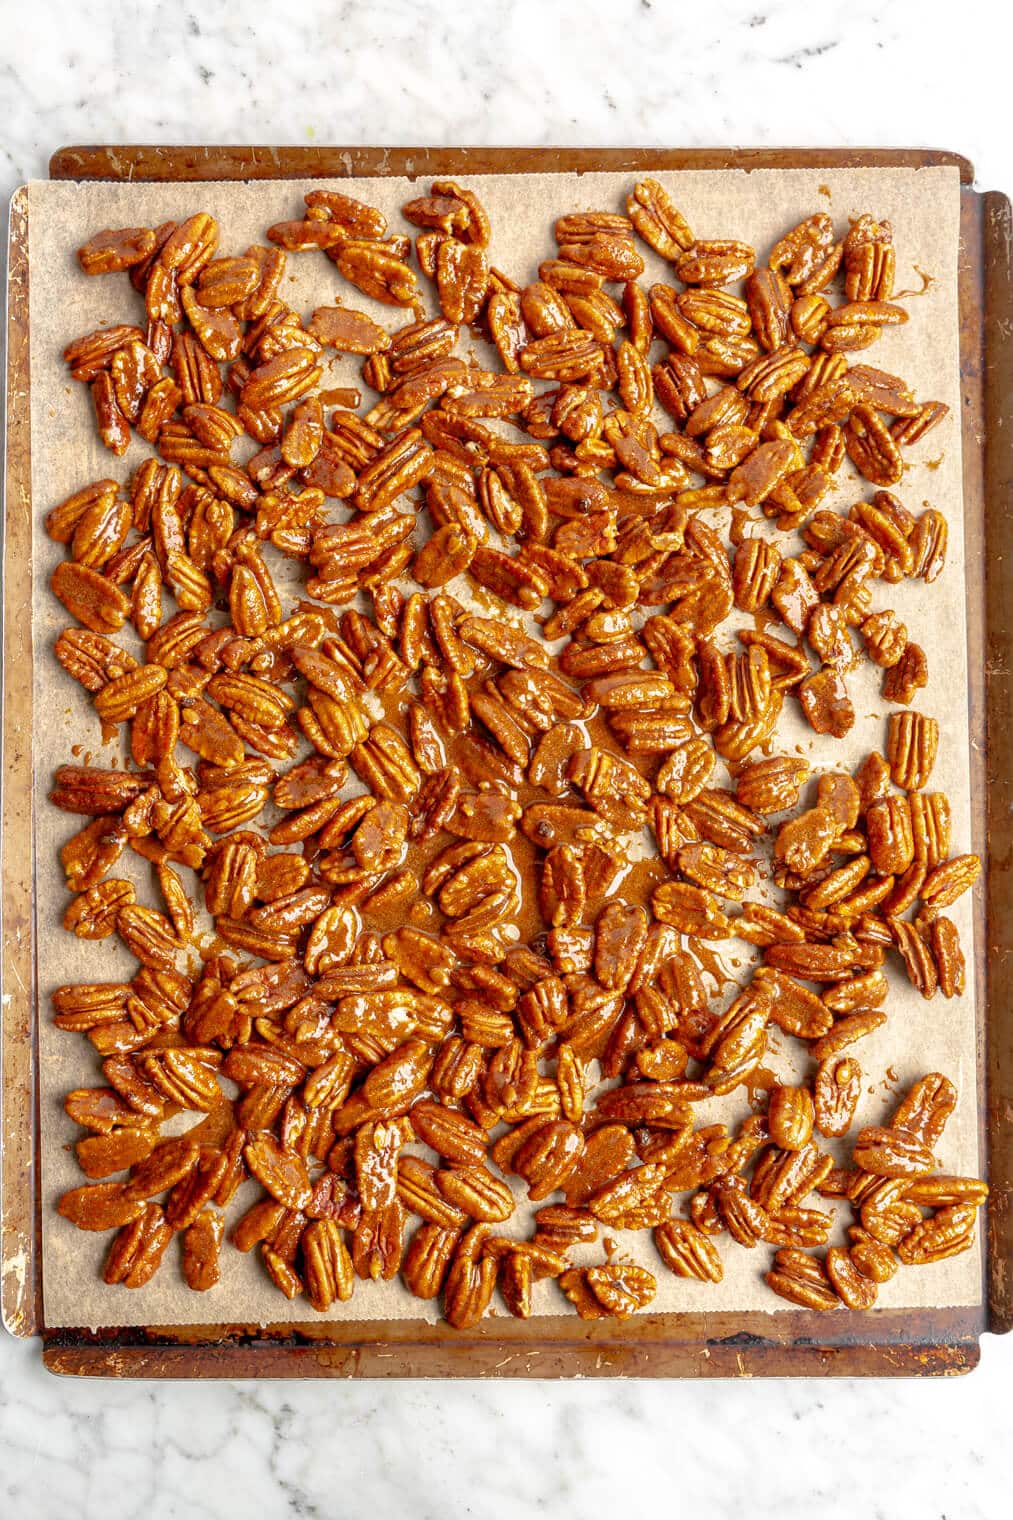 Candied pecan mixture spread out on a parchment lined baking sheet.